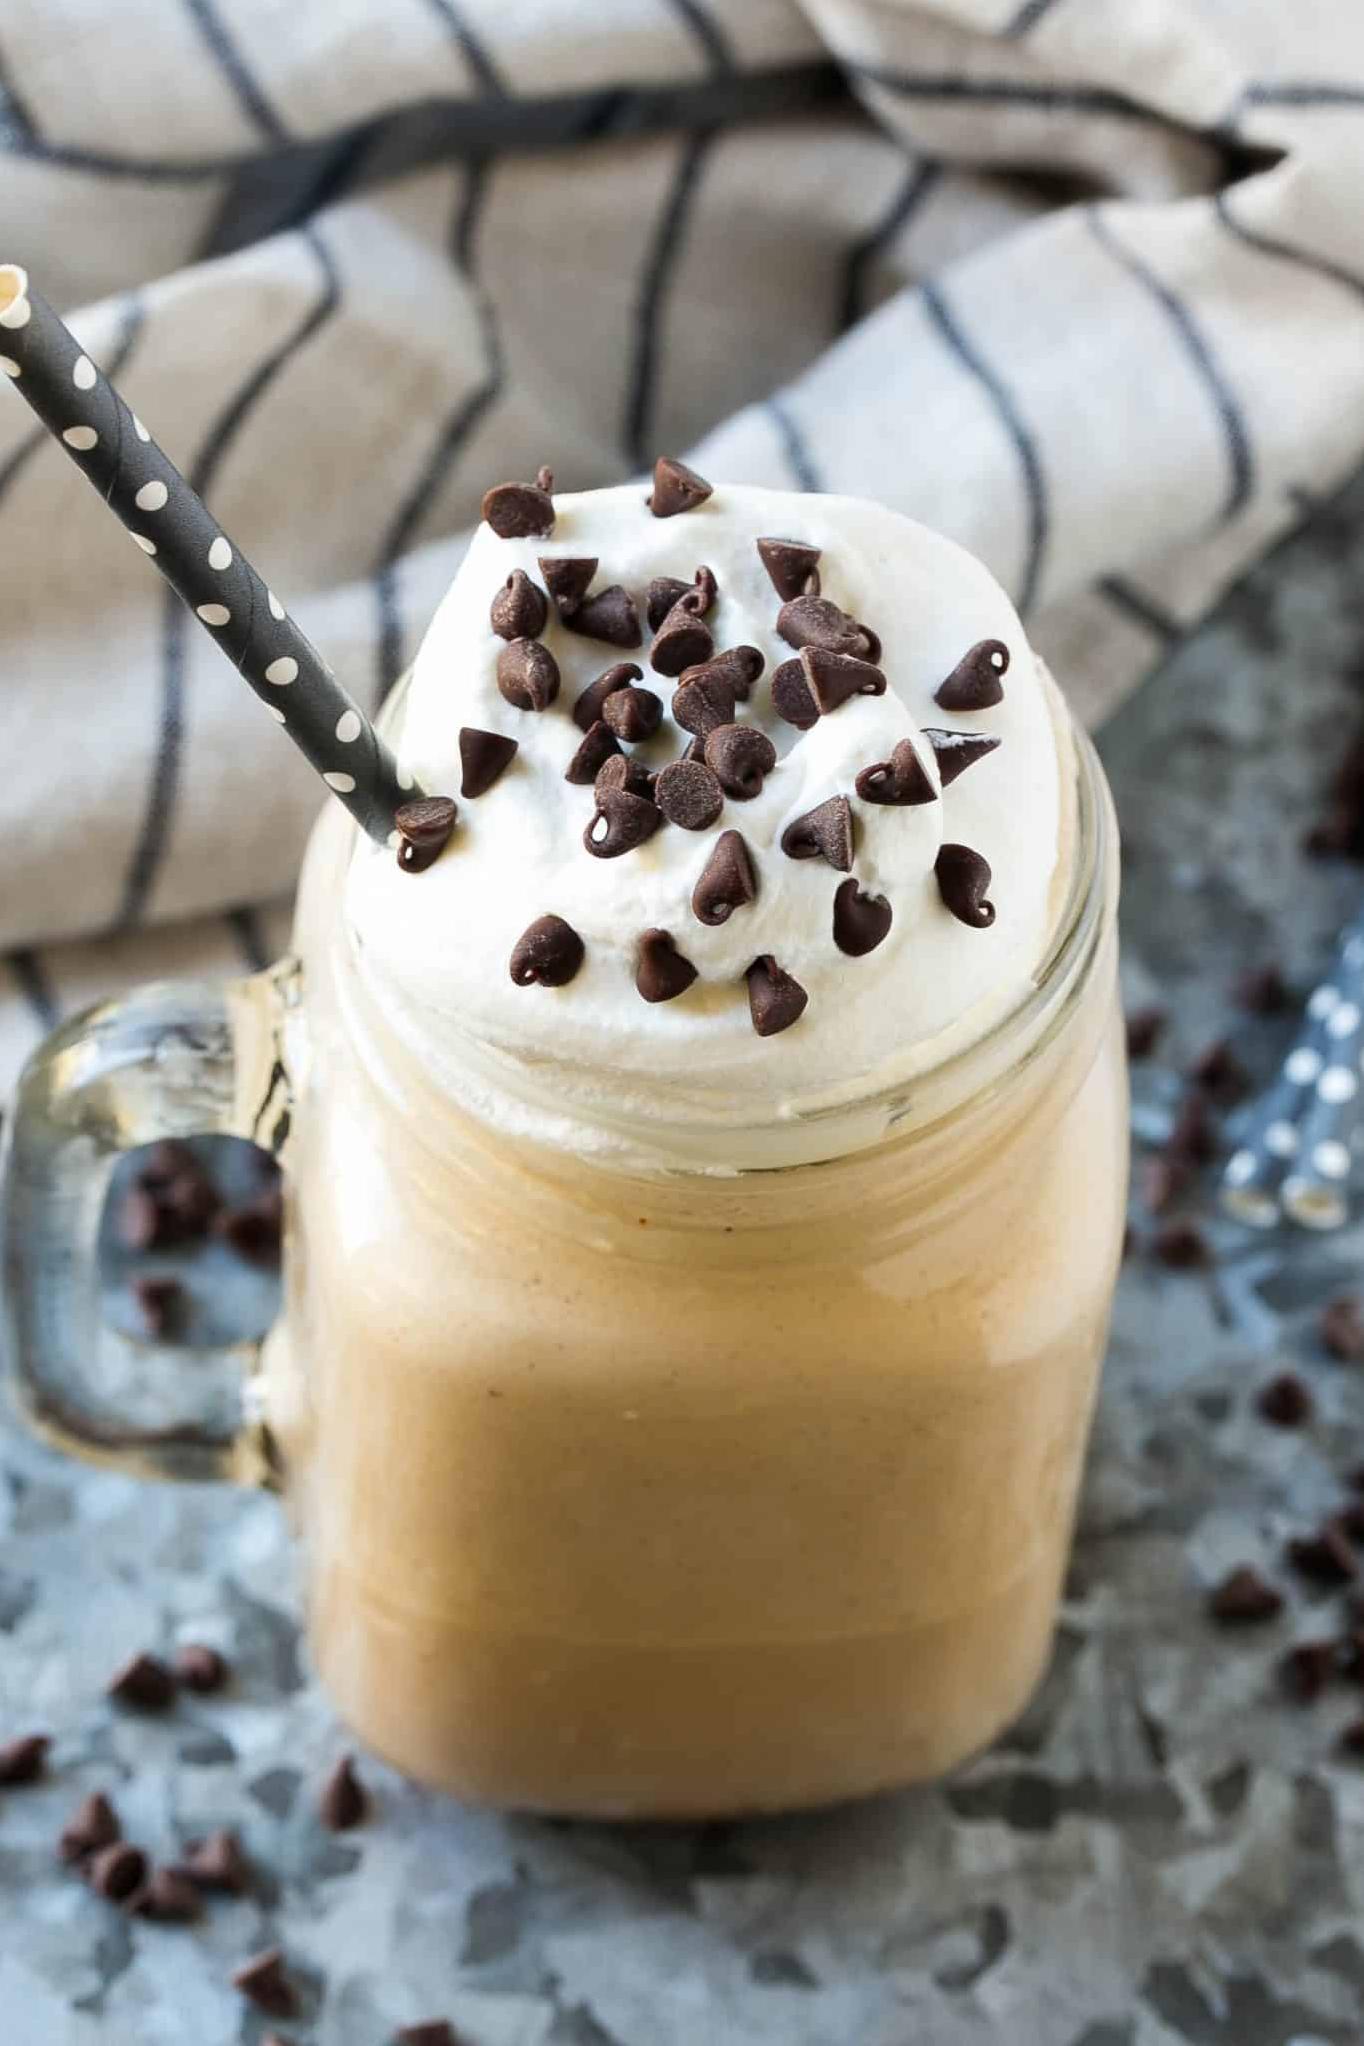  Our Mocha Latte Shake recipe is the perfect pick-me-up for any time of day.